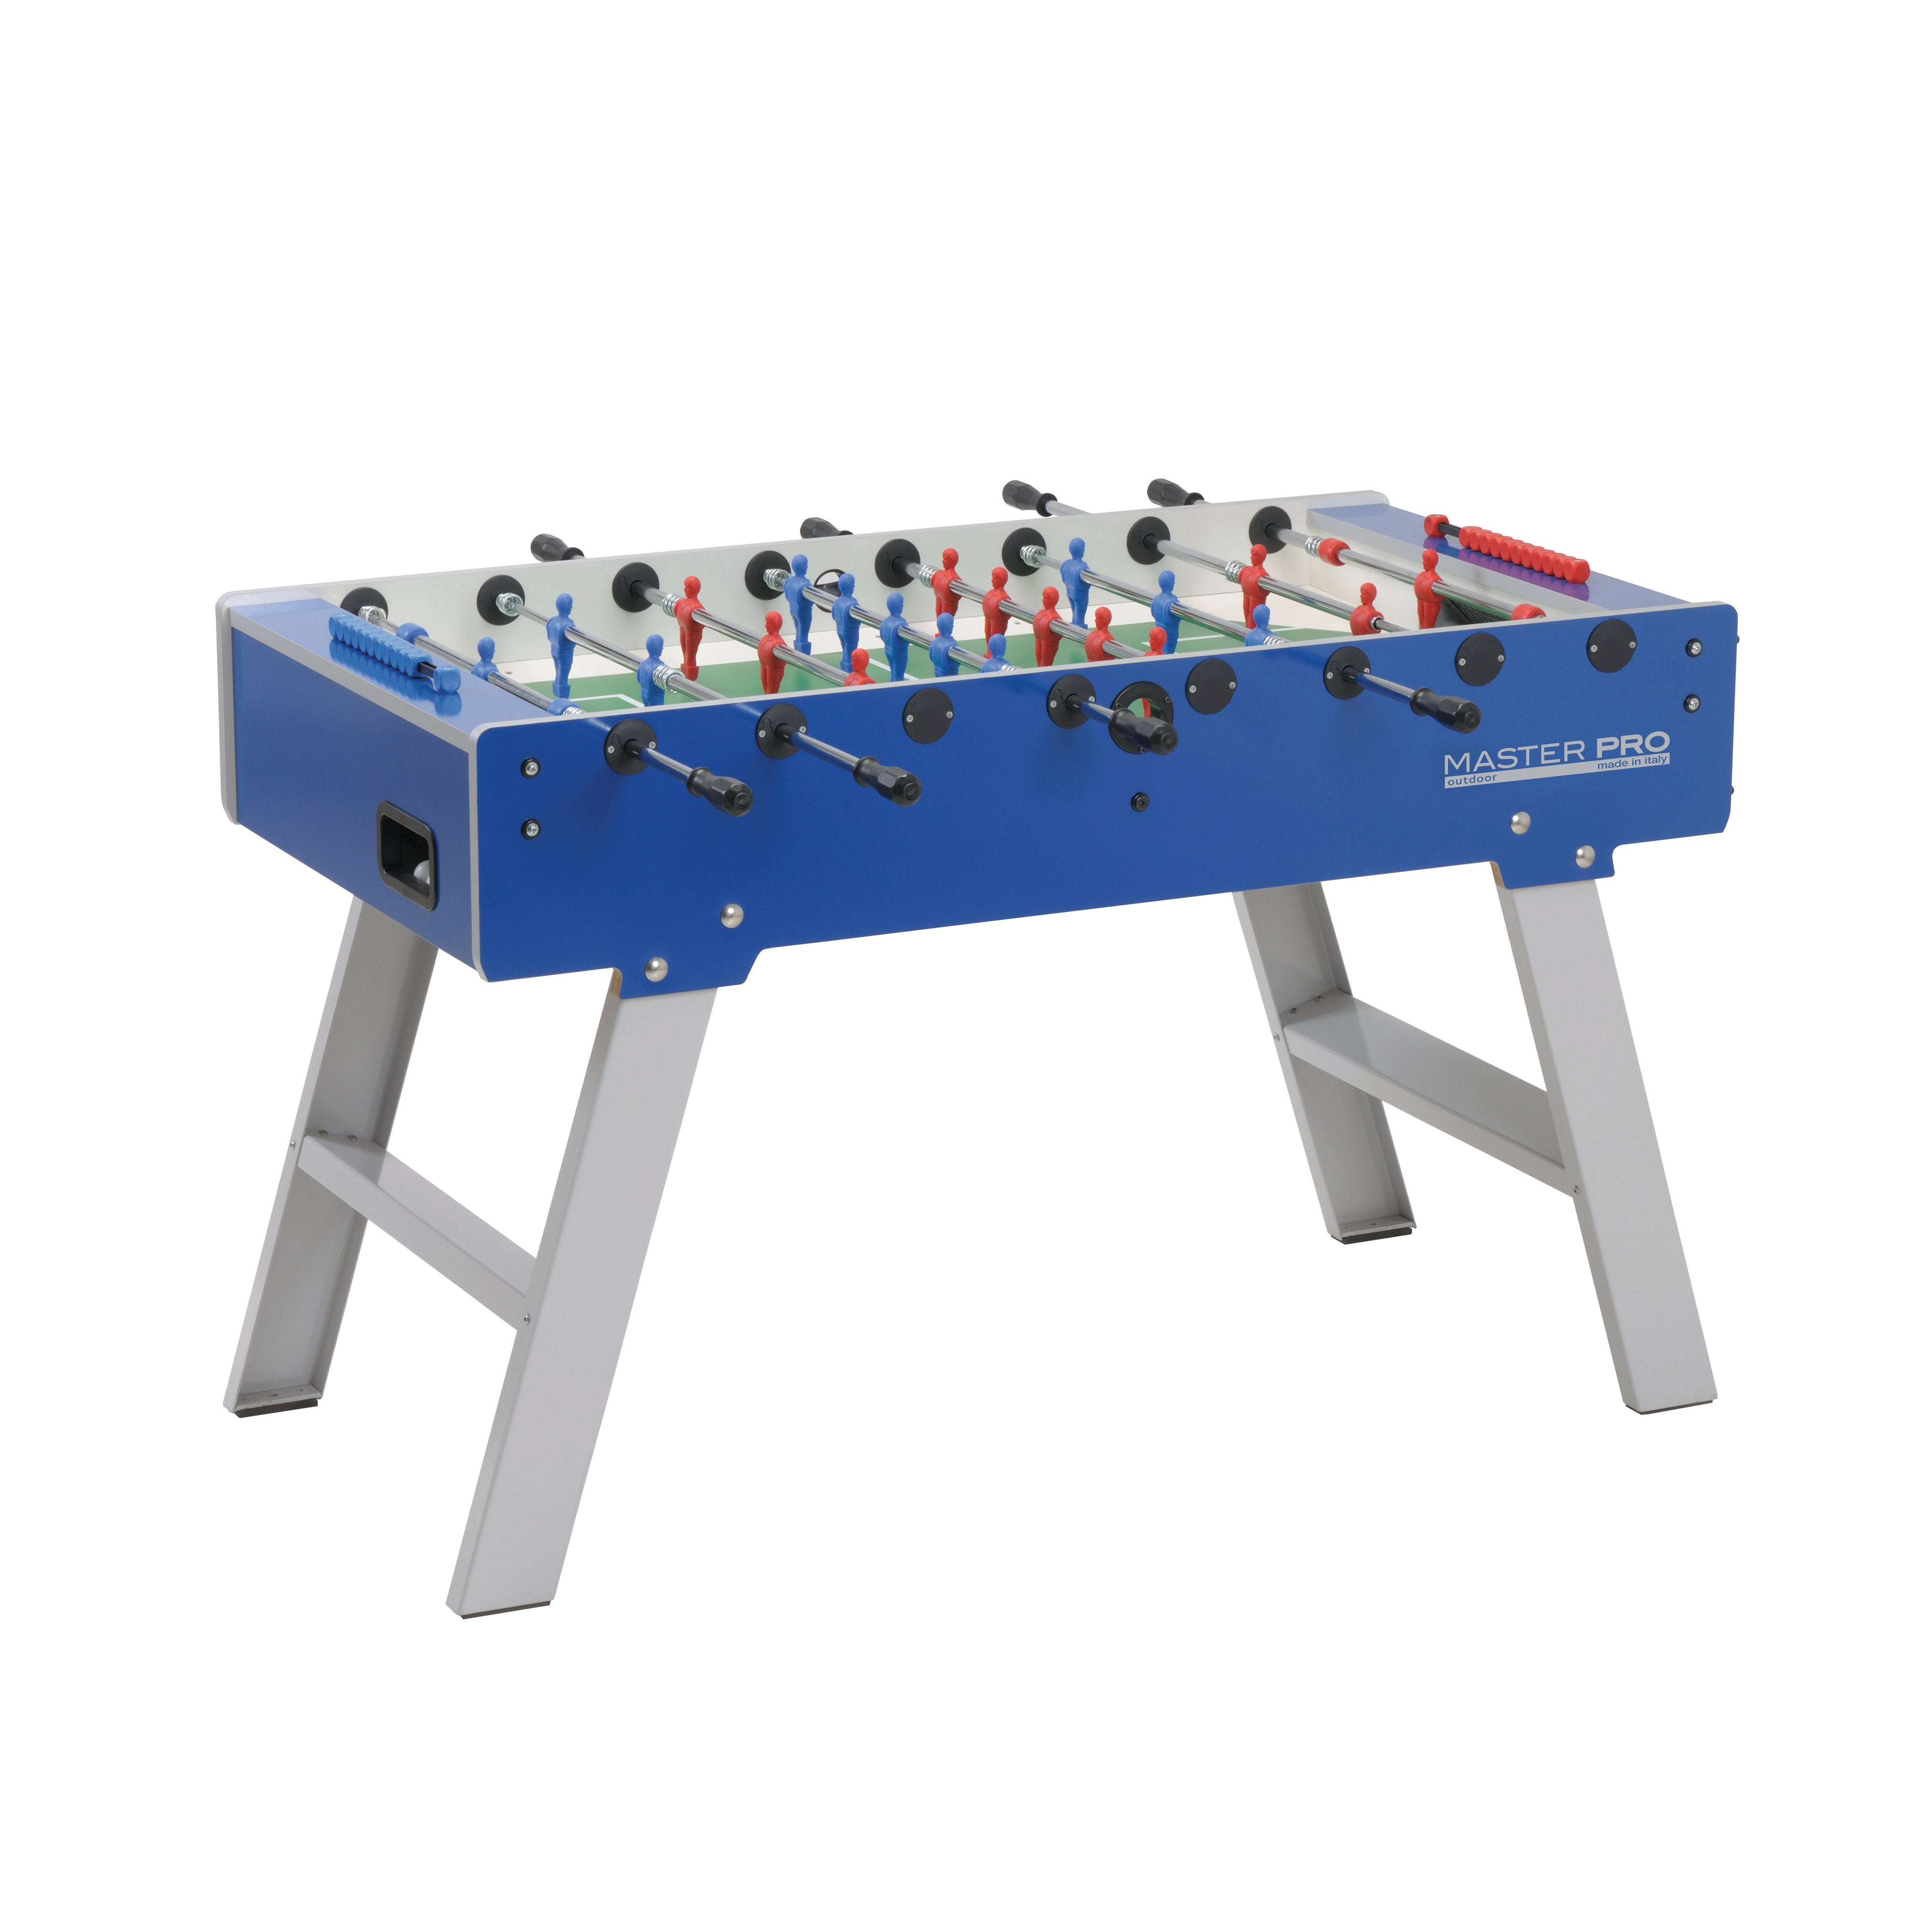 Outdoor weather resistant foosball table - 2 colors options